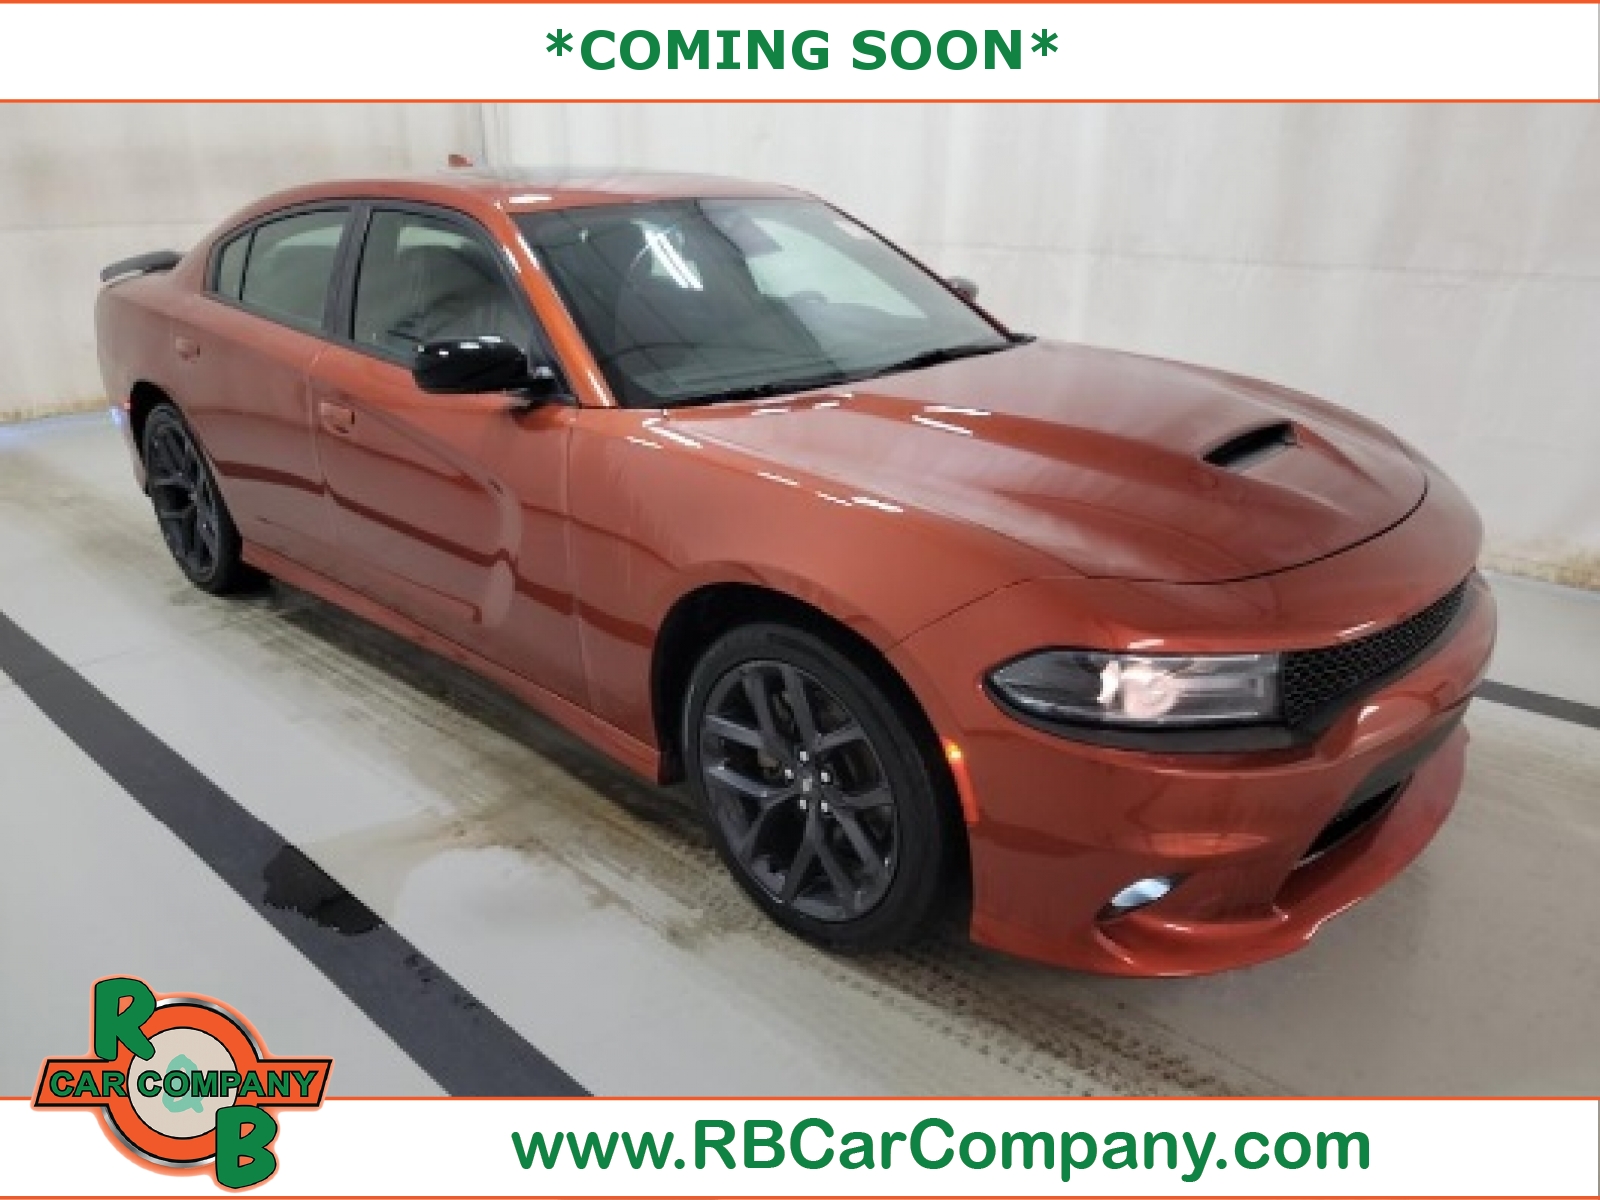 2021 Dodge Charger GT, 35856, Photo 1